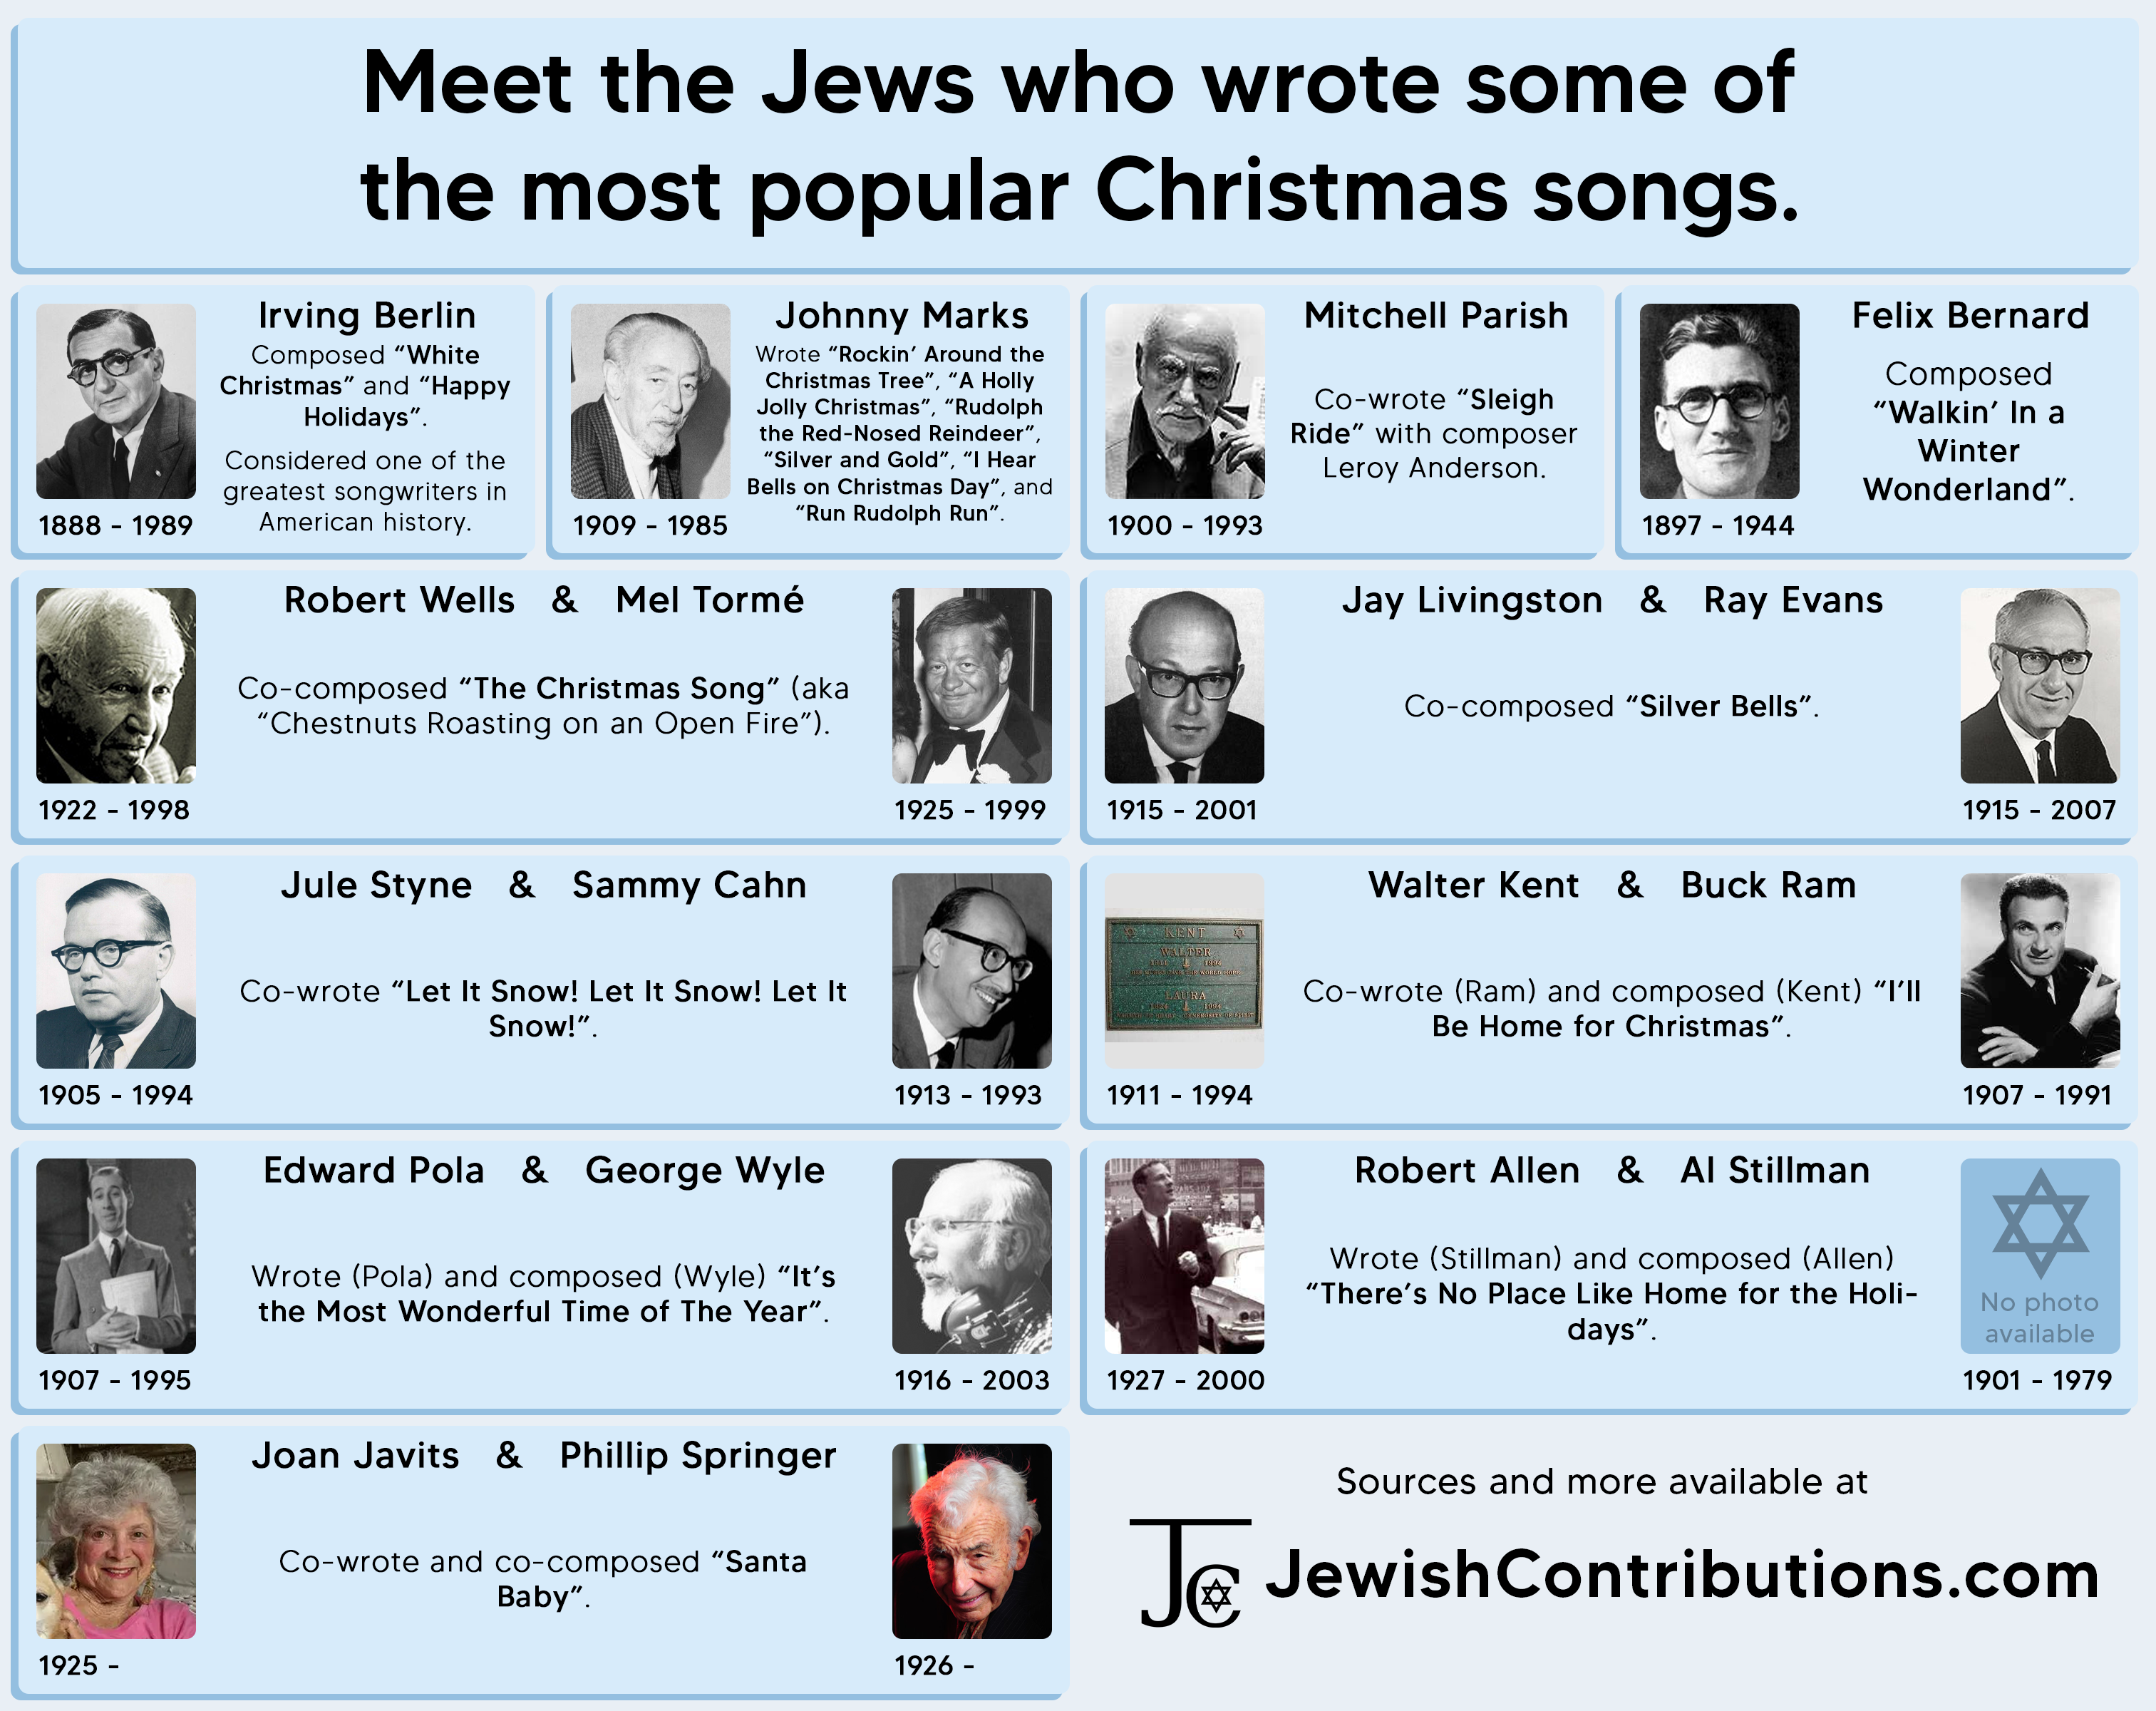 Meet the Jews who wrote some of the most popular Christmas holiday songs.